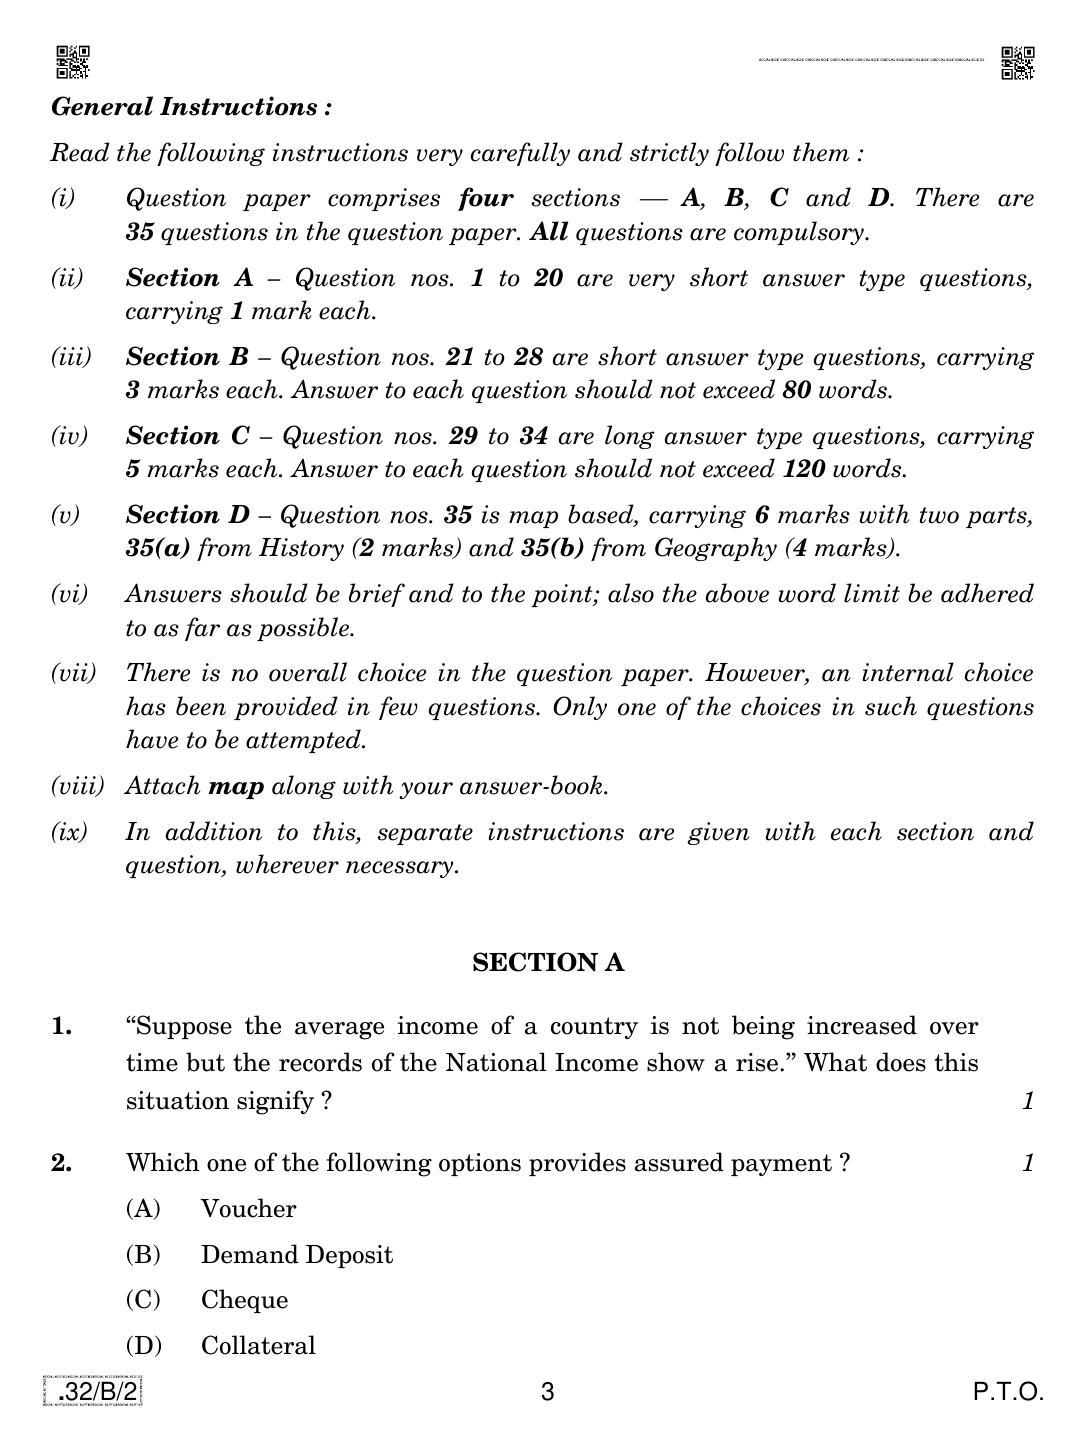 CBSE Class 10 32-C-2 Social Science 2020 Compartment Question Paper - Page 3